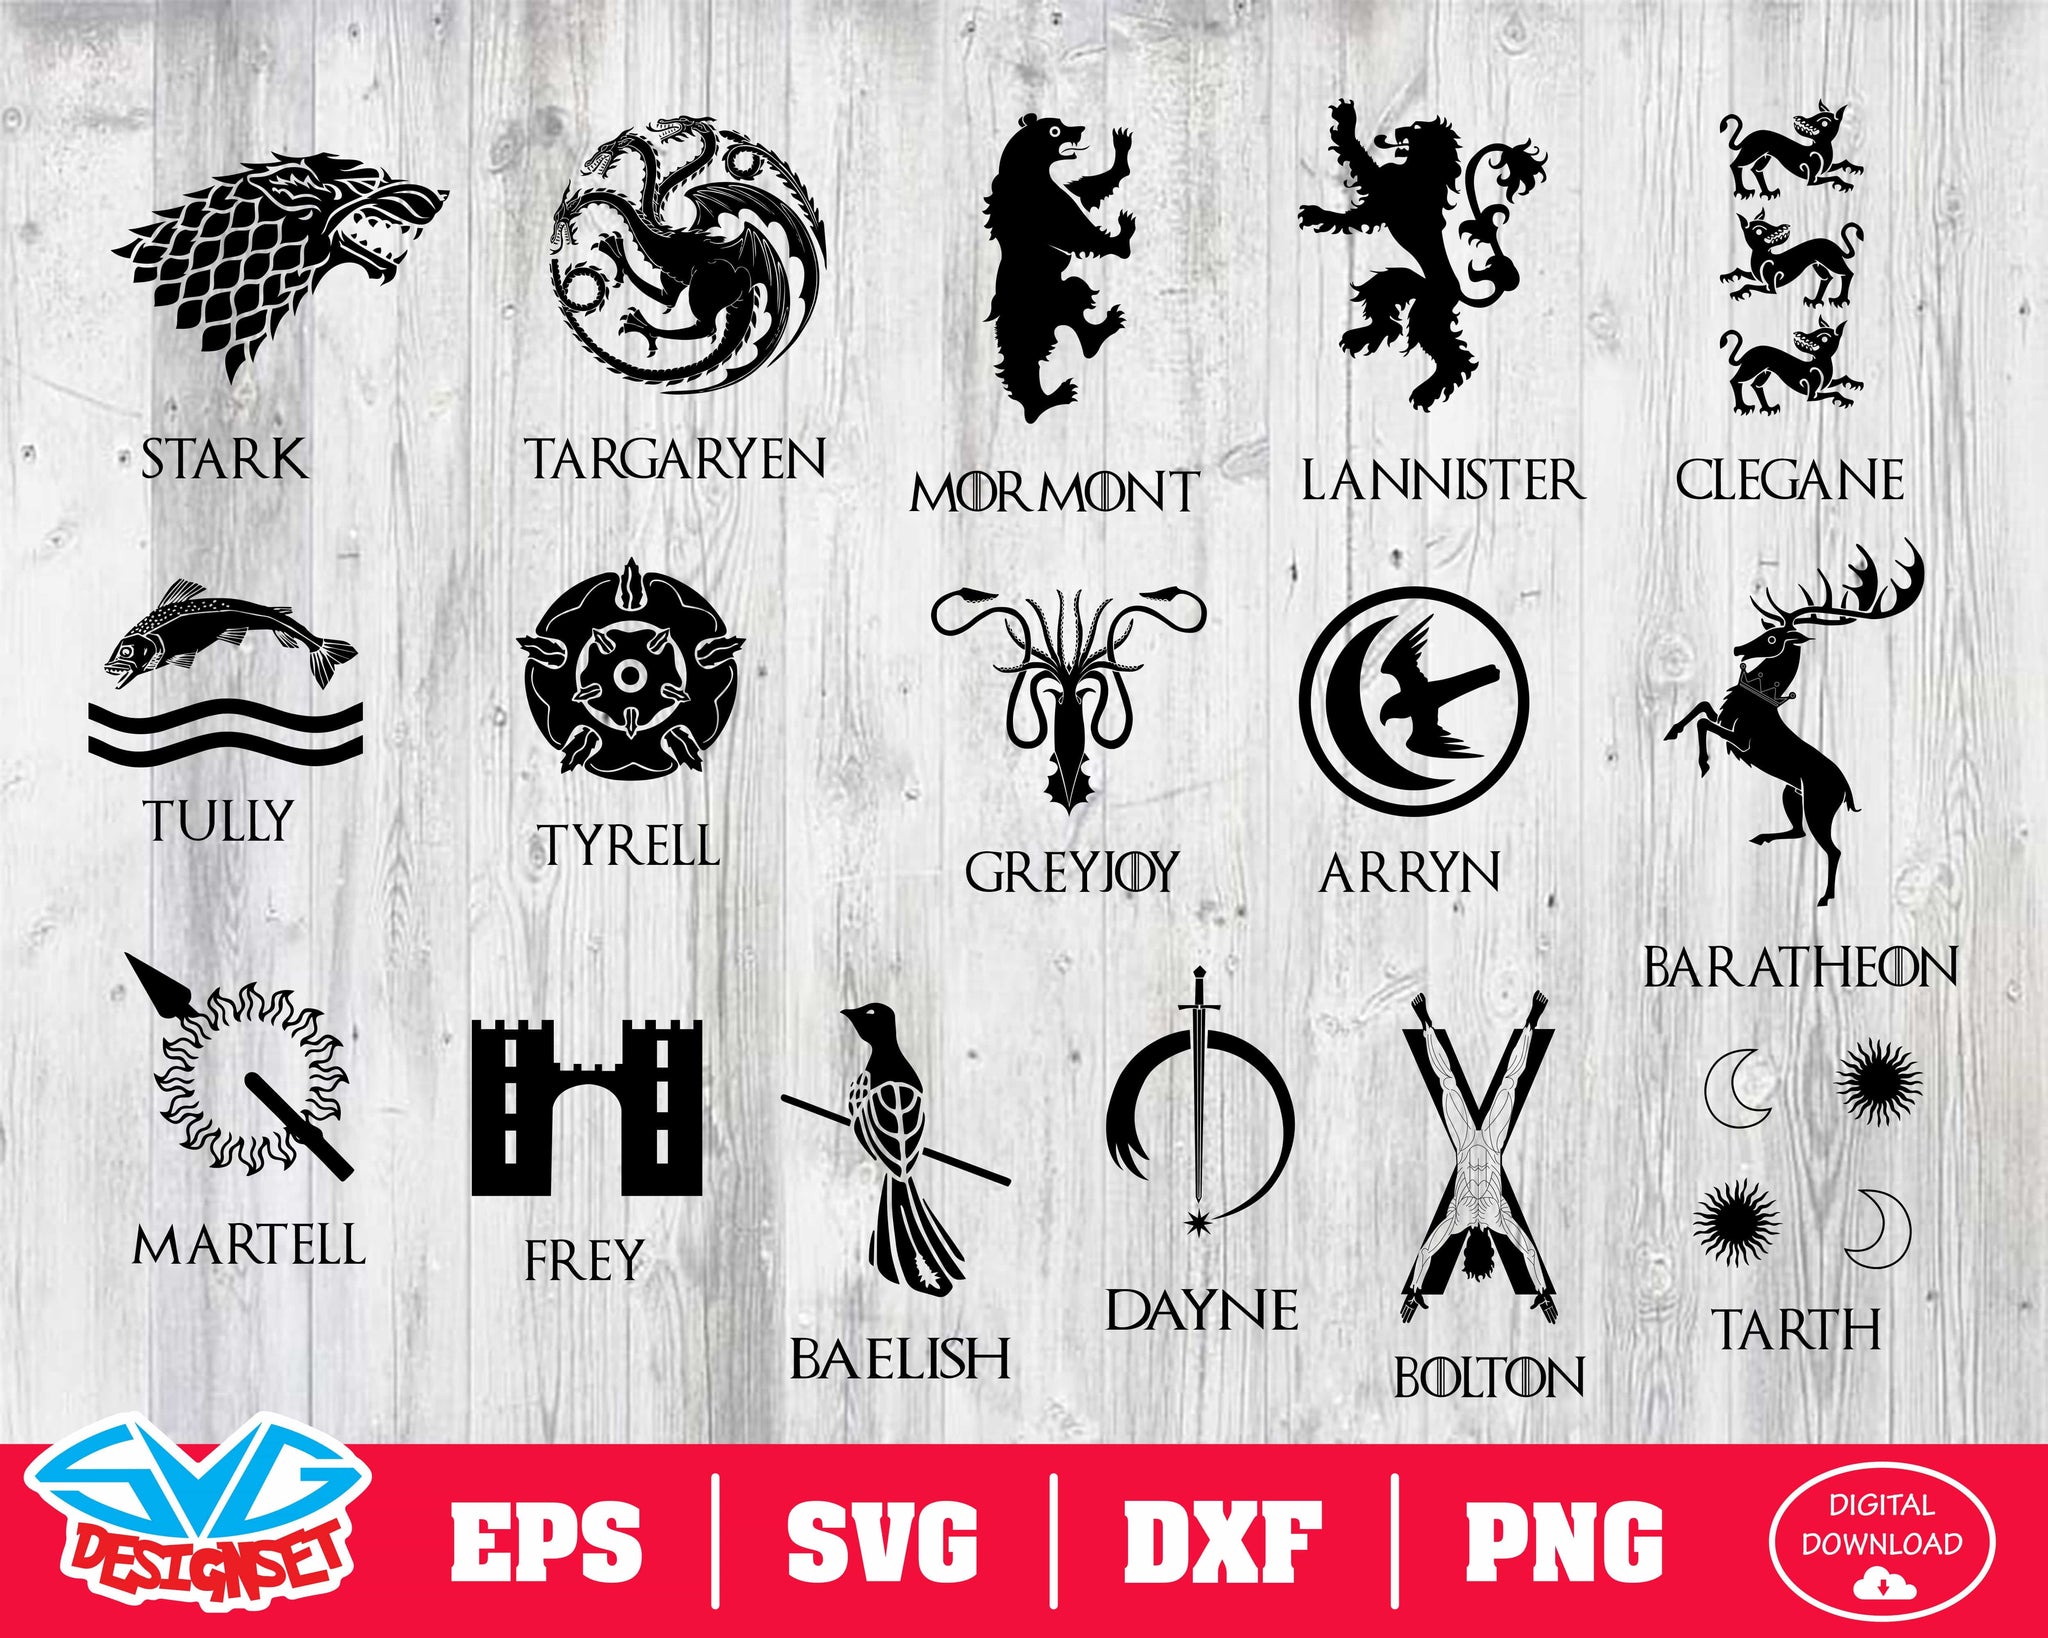 Game of Thrones Svg, Dxf, Eps, Png, Clipart, Silhouette and Cutfiles #1 - SVGDesignSets